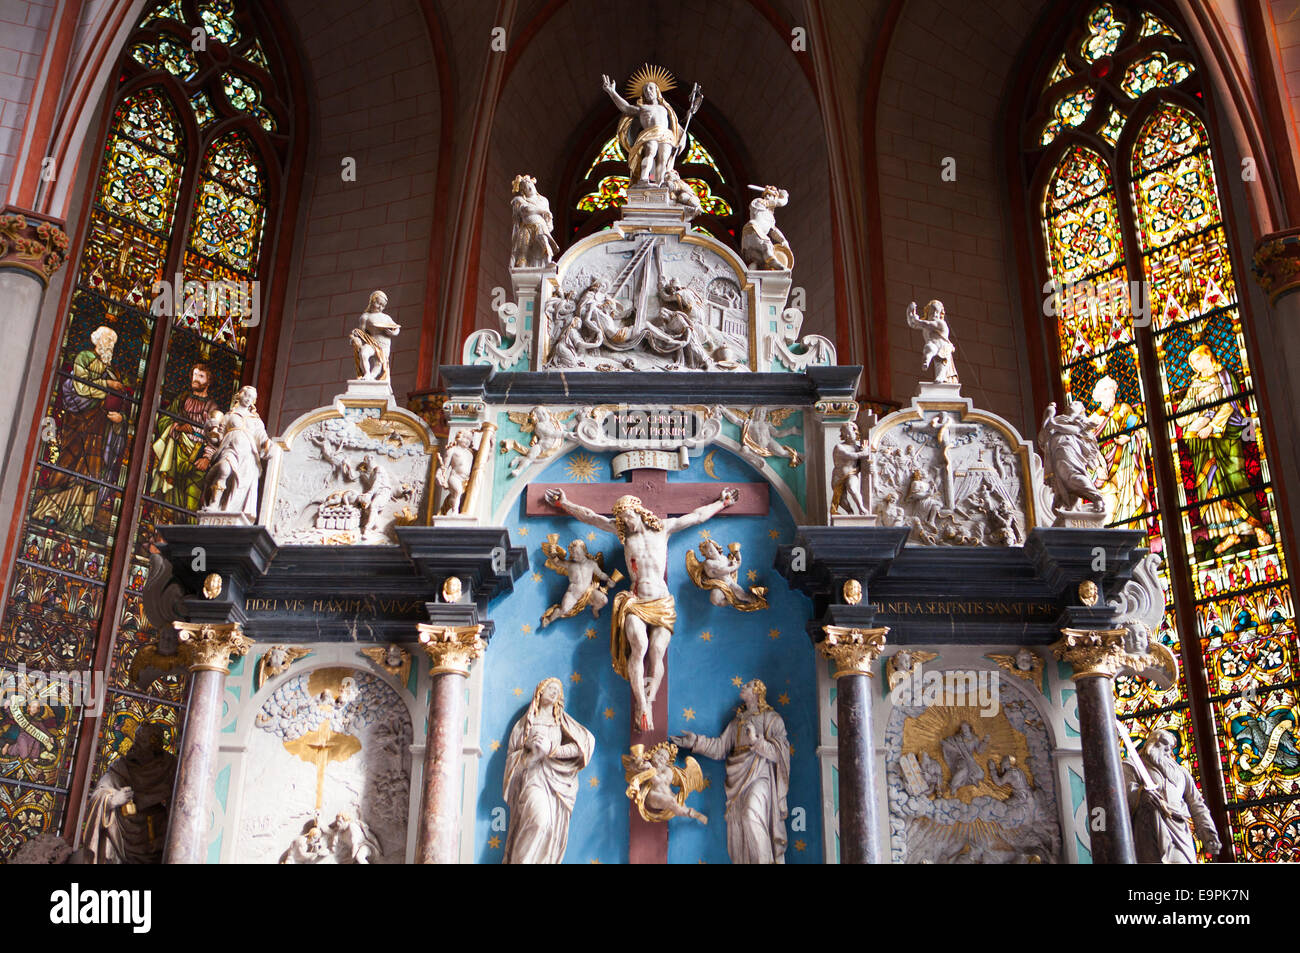 Altare, St Mary chiesa parrocchiale, Marburg, Hesse, Germania, Europa , Foto Stock